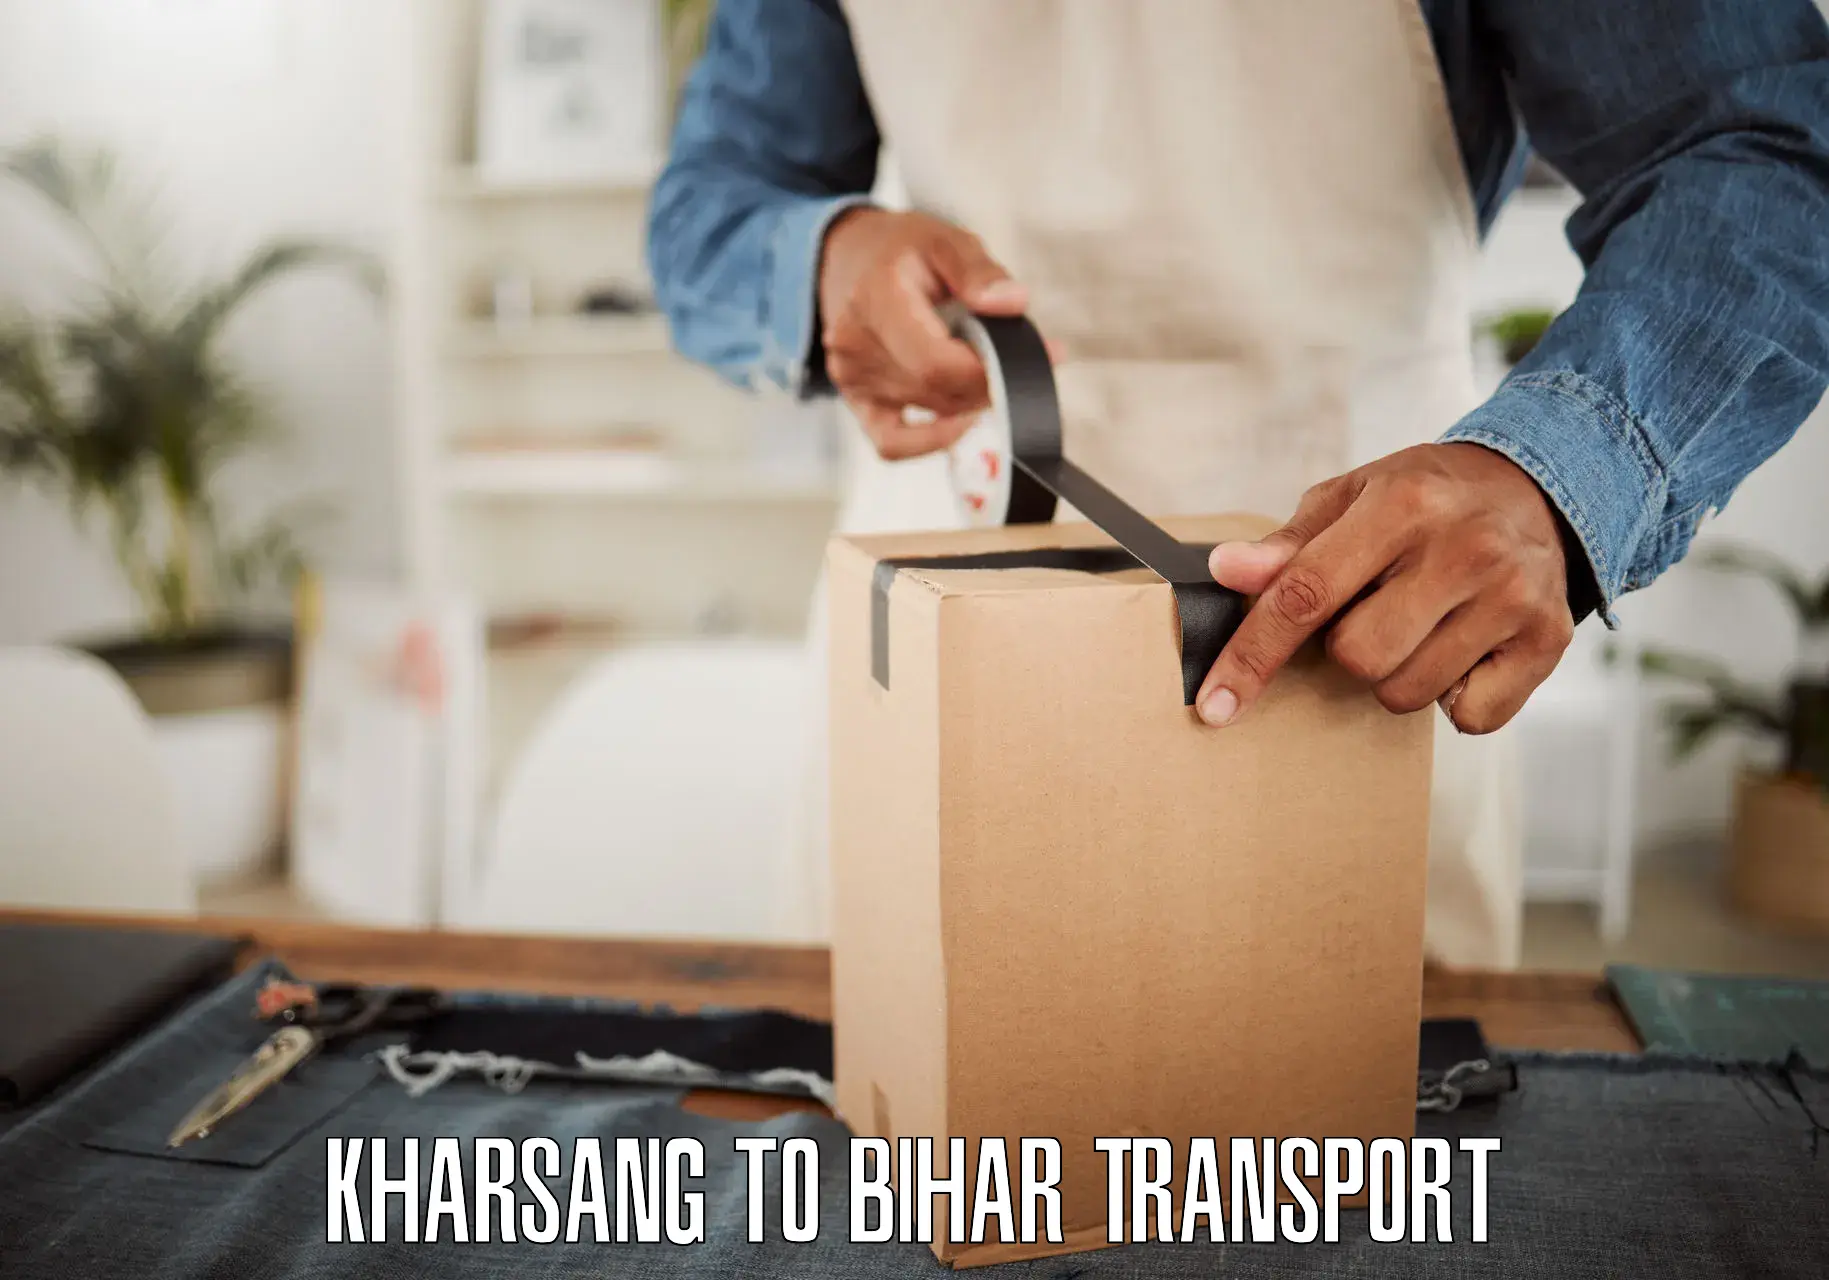 Transport in sharing Kharsang to Bhojpur